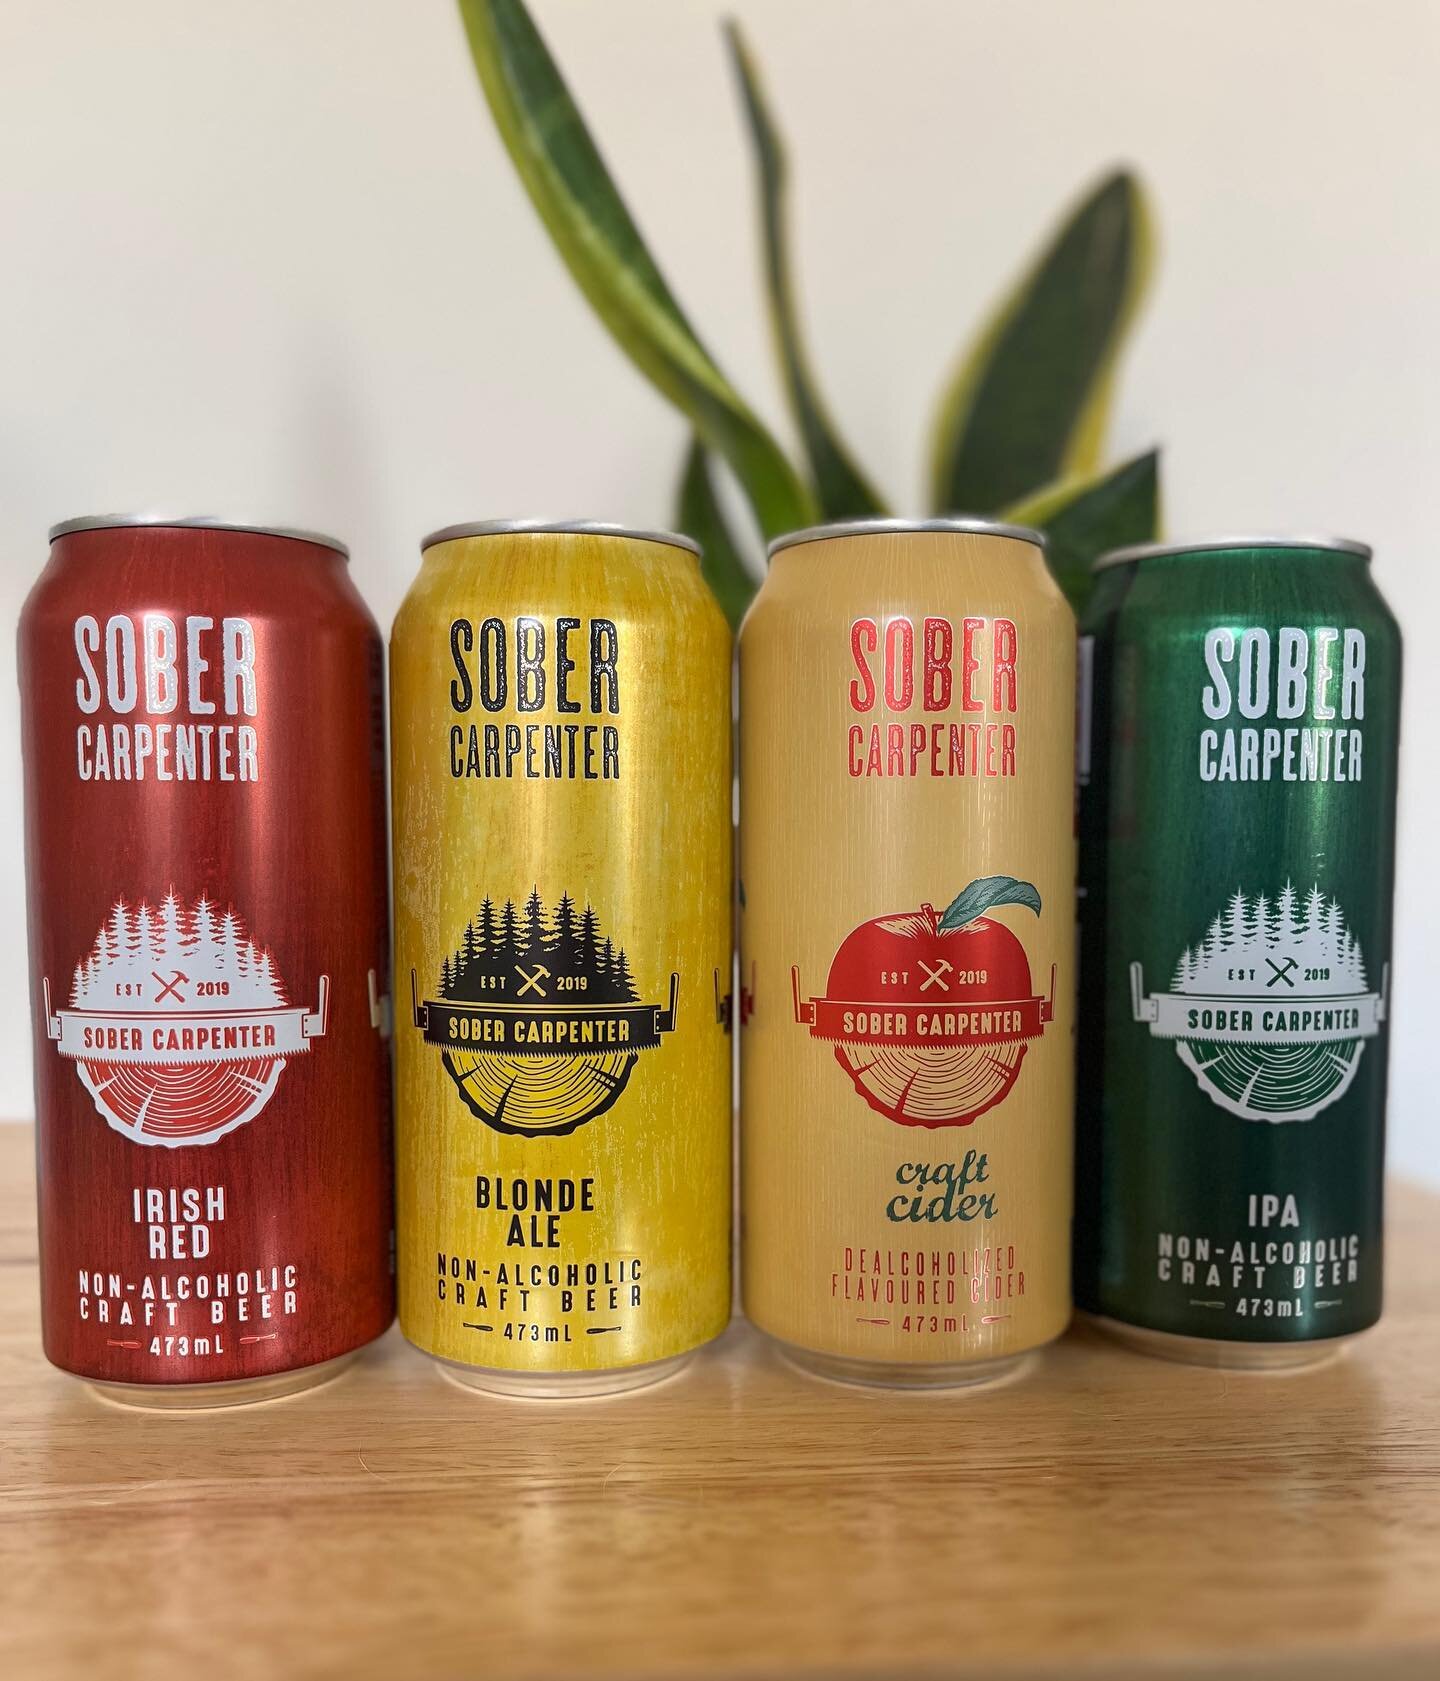 Embrace flavor diversity with Sober Carpenter's new lineup now available! From the malty richness of Irish Red to the crispness of Blonde Ale, the refreshing Cider, and the boldness of an IPA&mdash;all non-alcoholic and packed with taste sensations! 